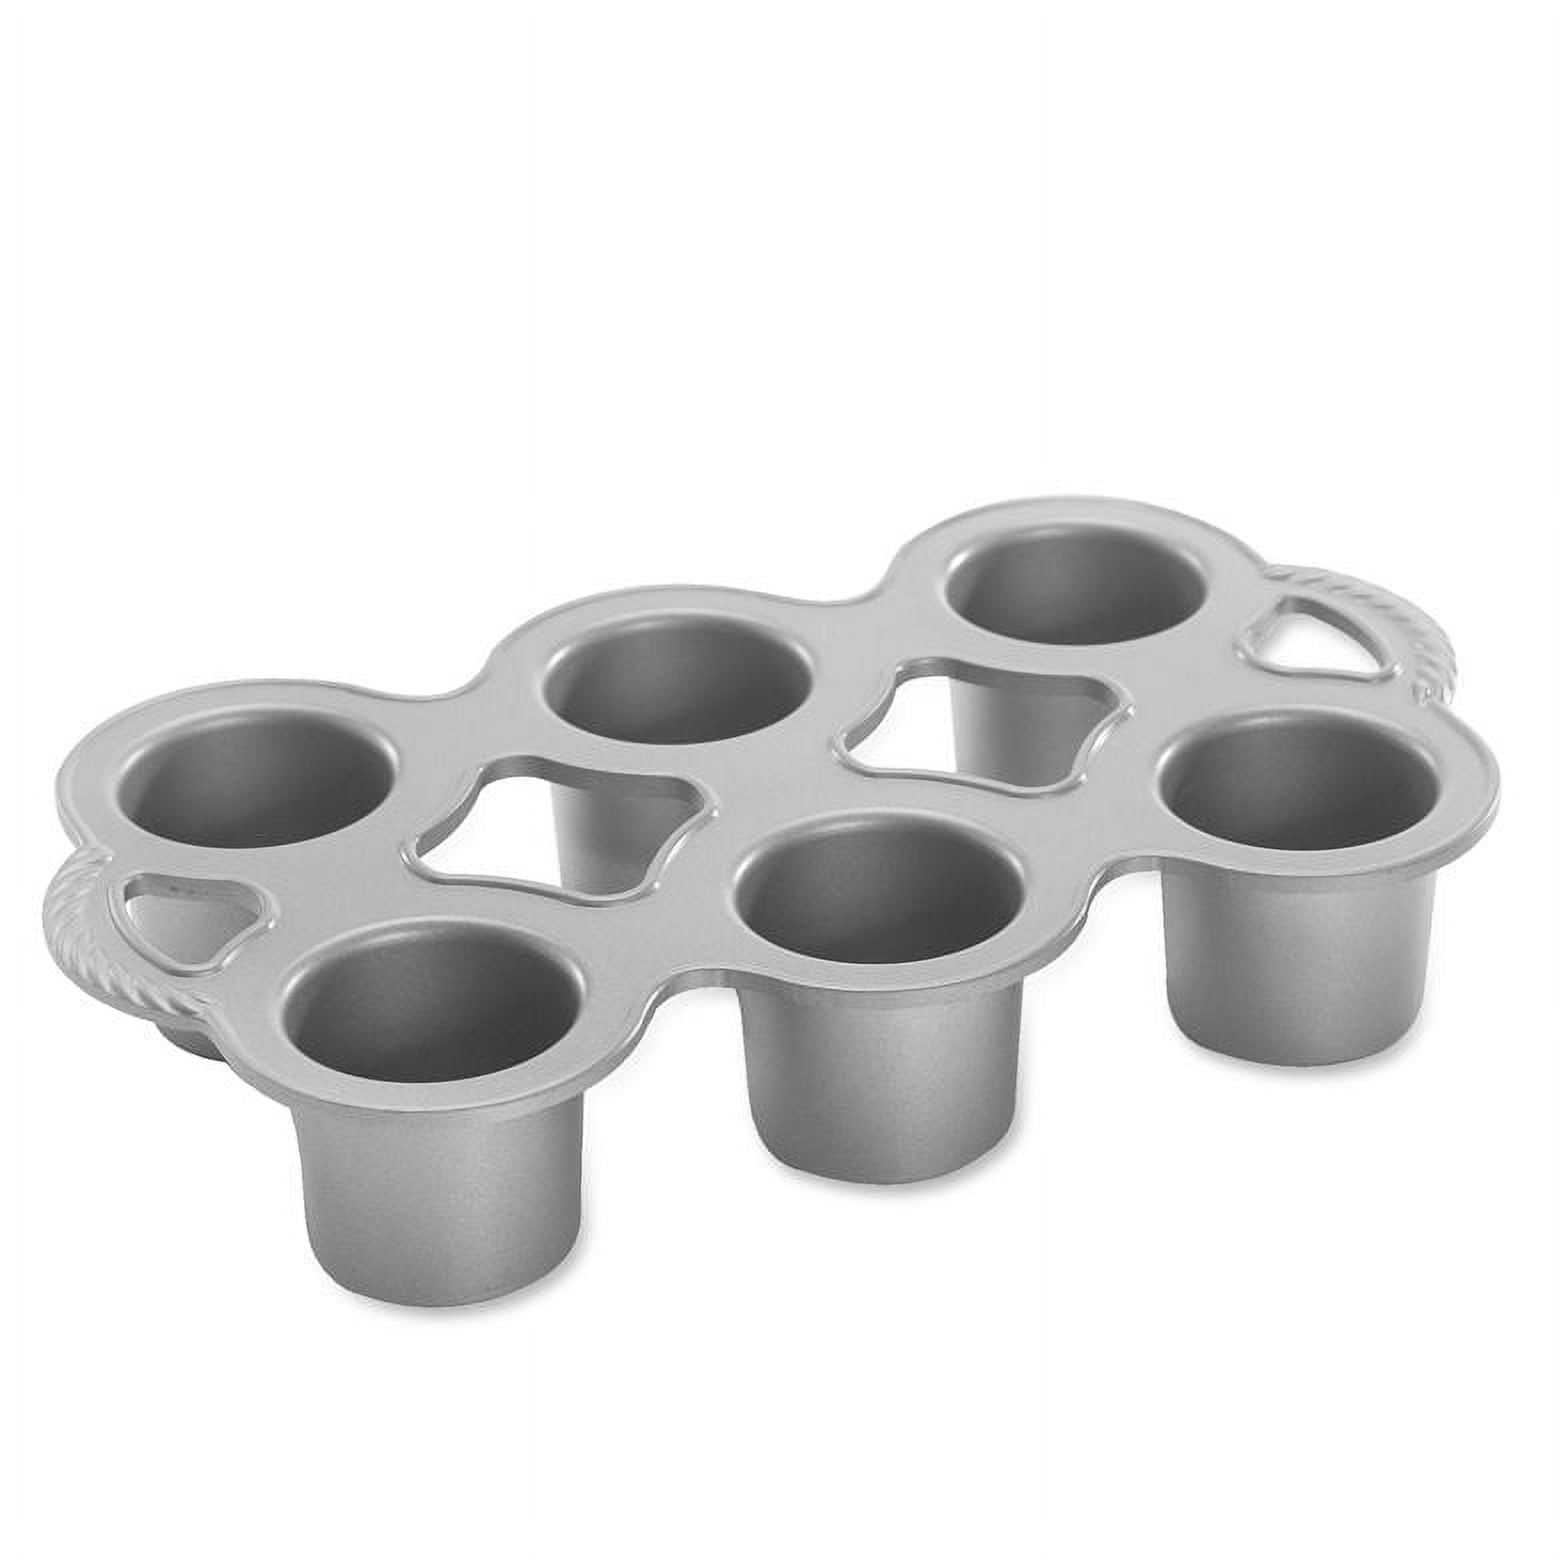 Nordic Ware Popover Pan - Products, bookmarks, design, inspiration